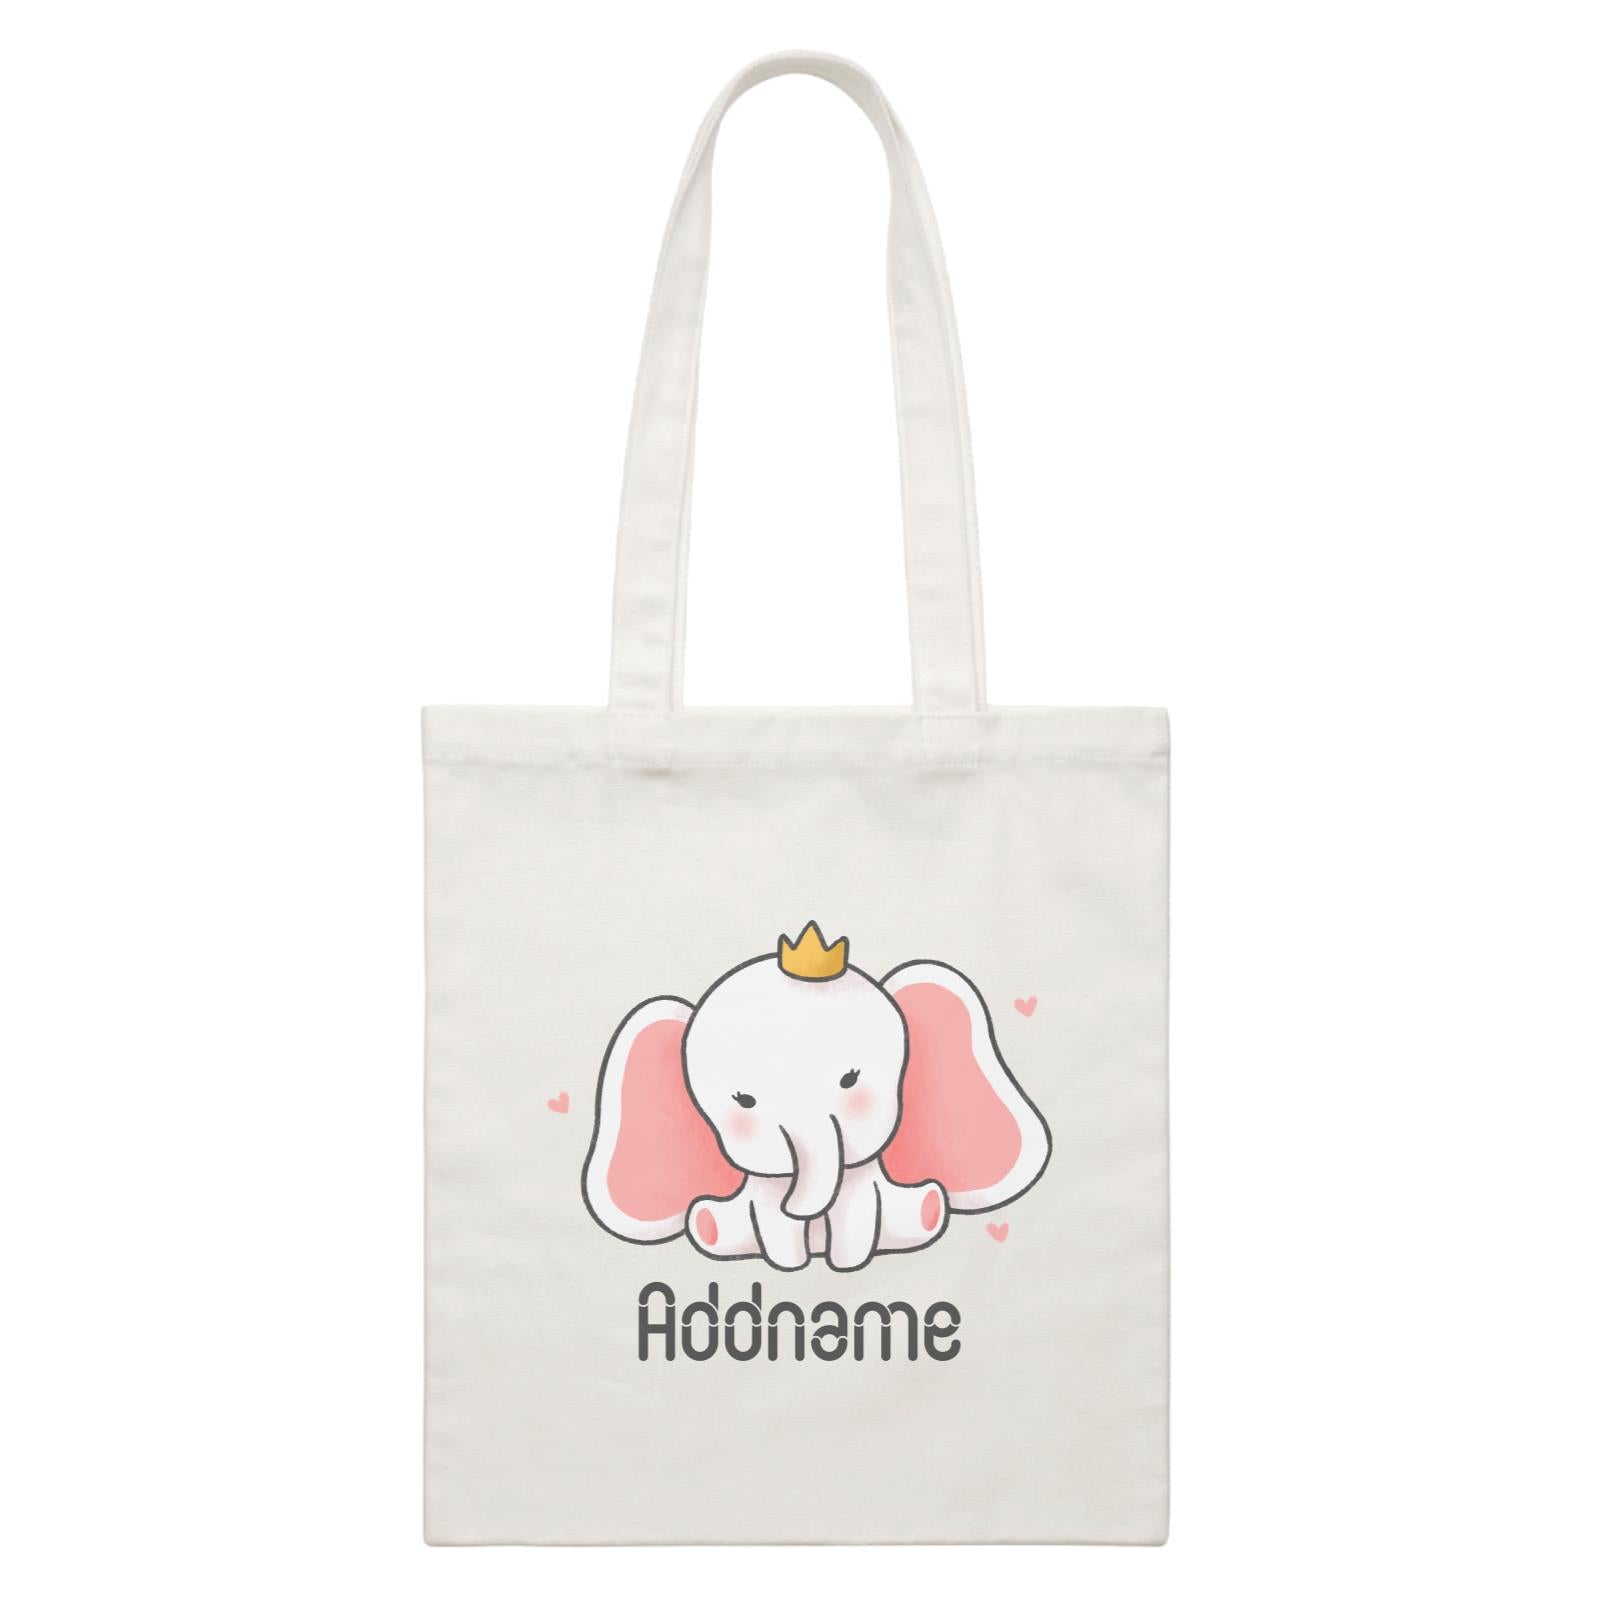 Cute Hand Drawn Style Baby Elephant with Crown Addname White Canvas Bag